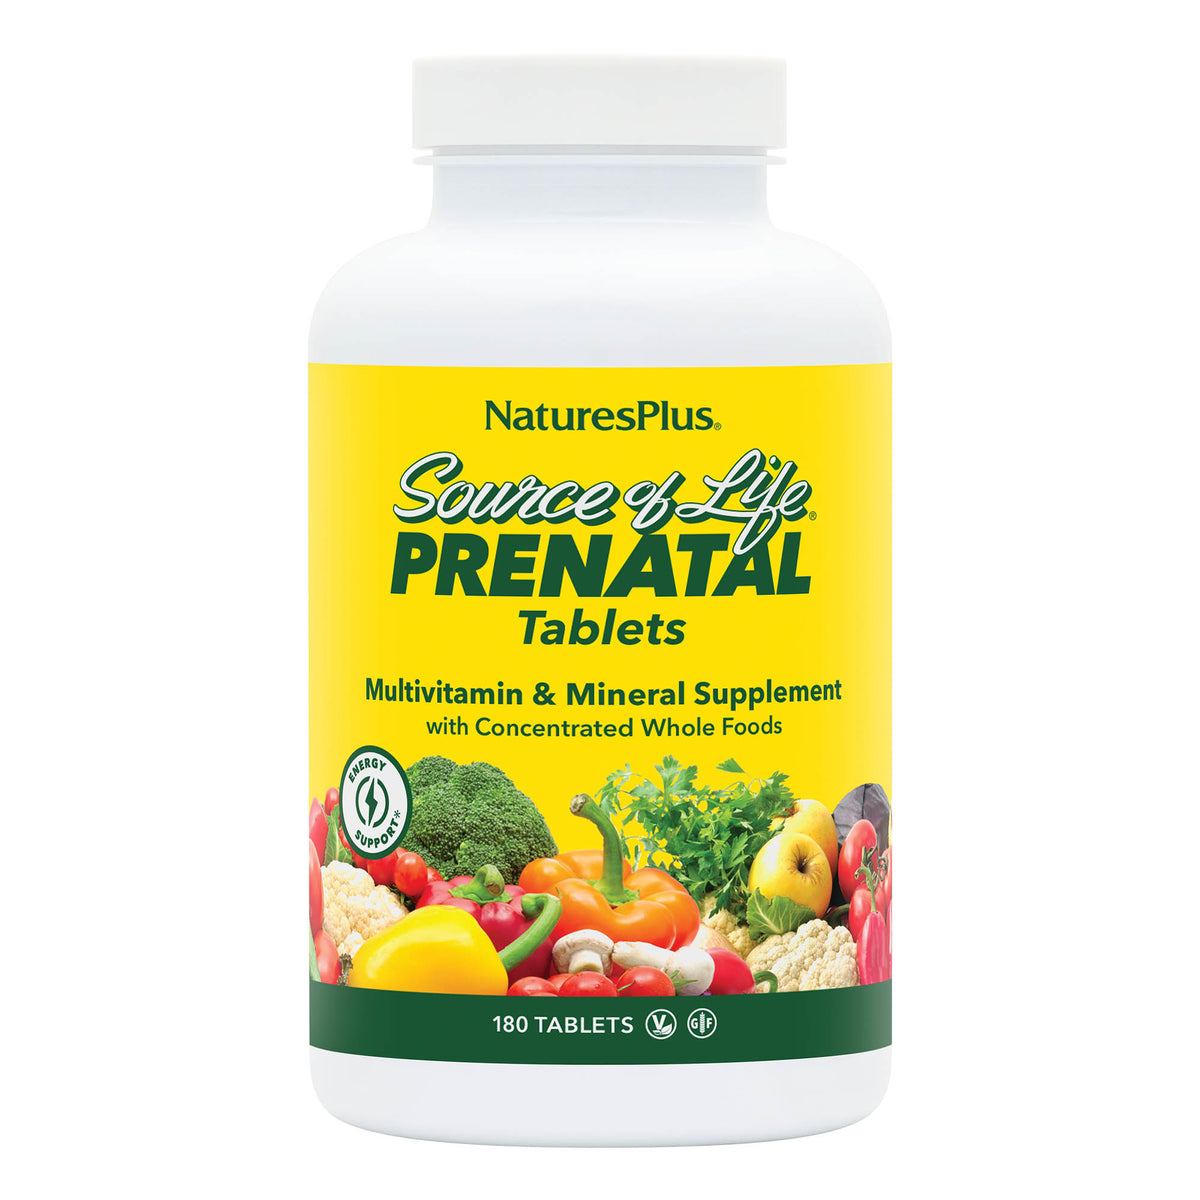 product image of Source of Life® Prenatal Multivitamin Tablets containing 180 Count